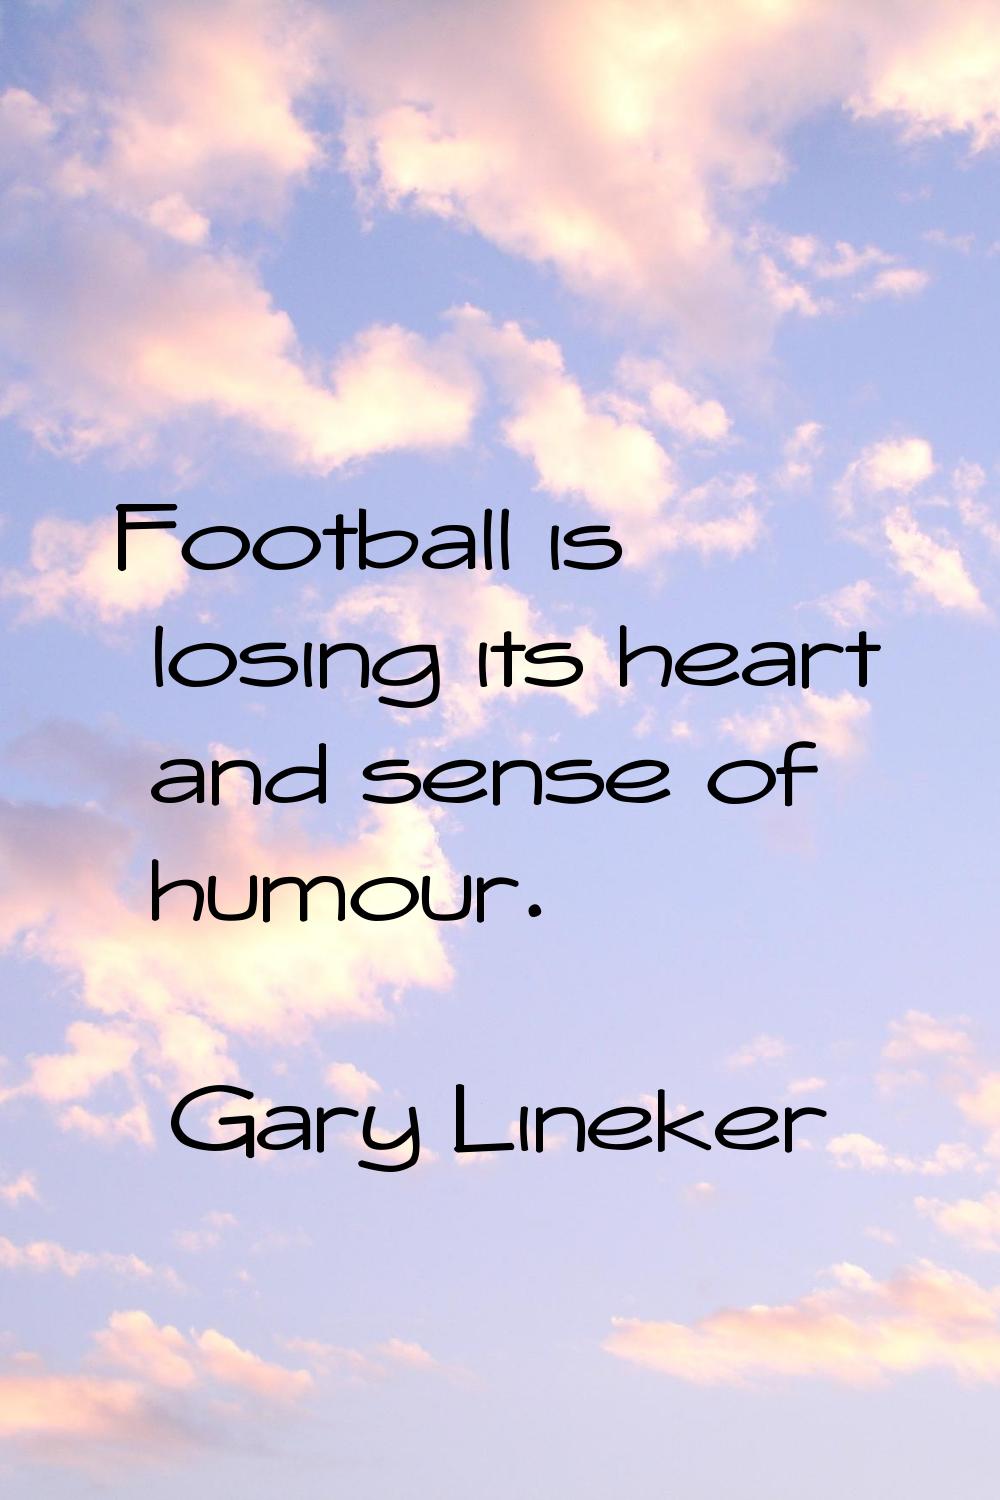 Football is losing its heart and sense of humour.